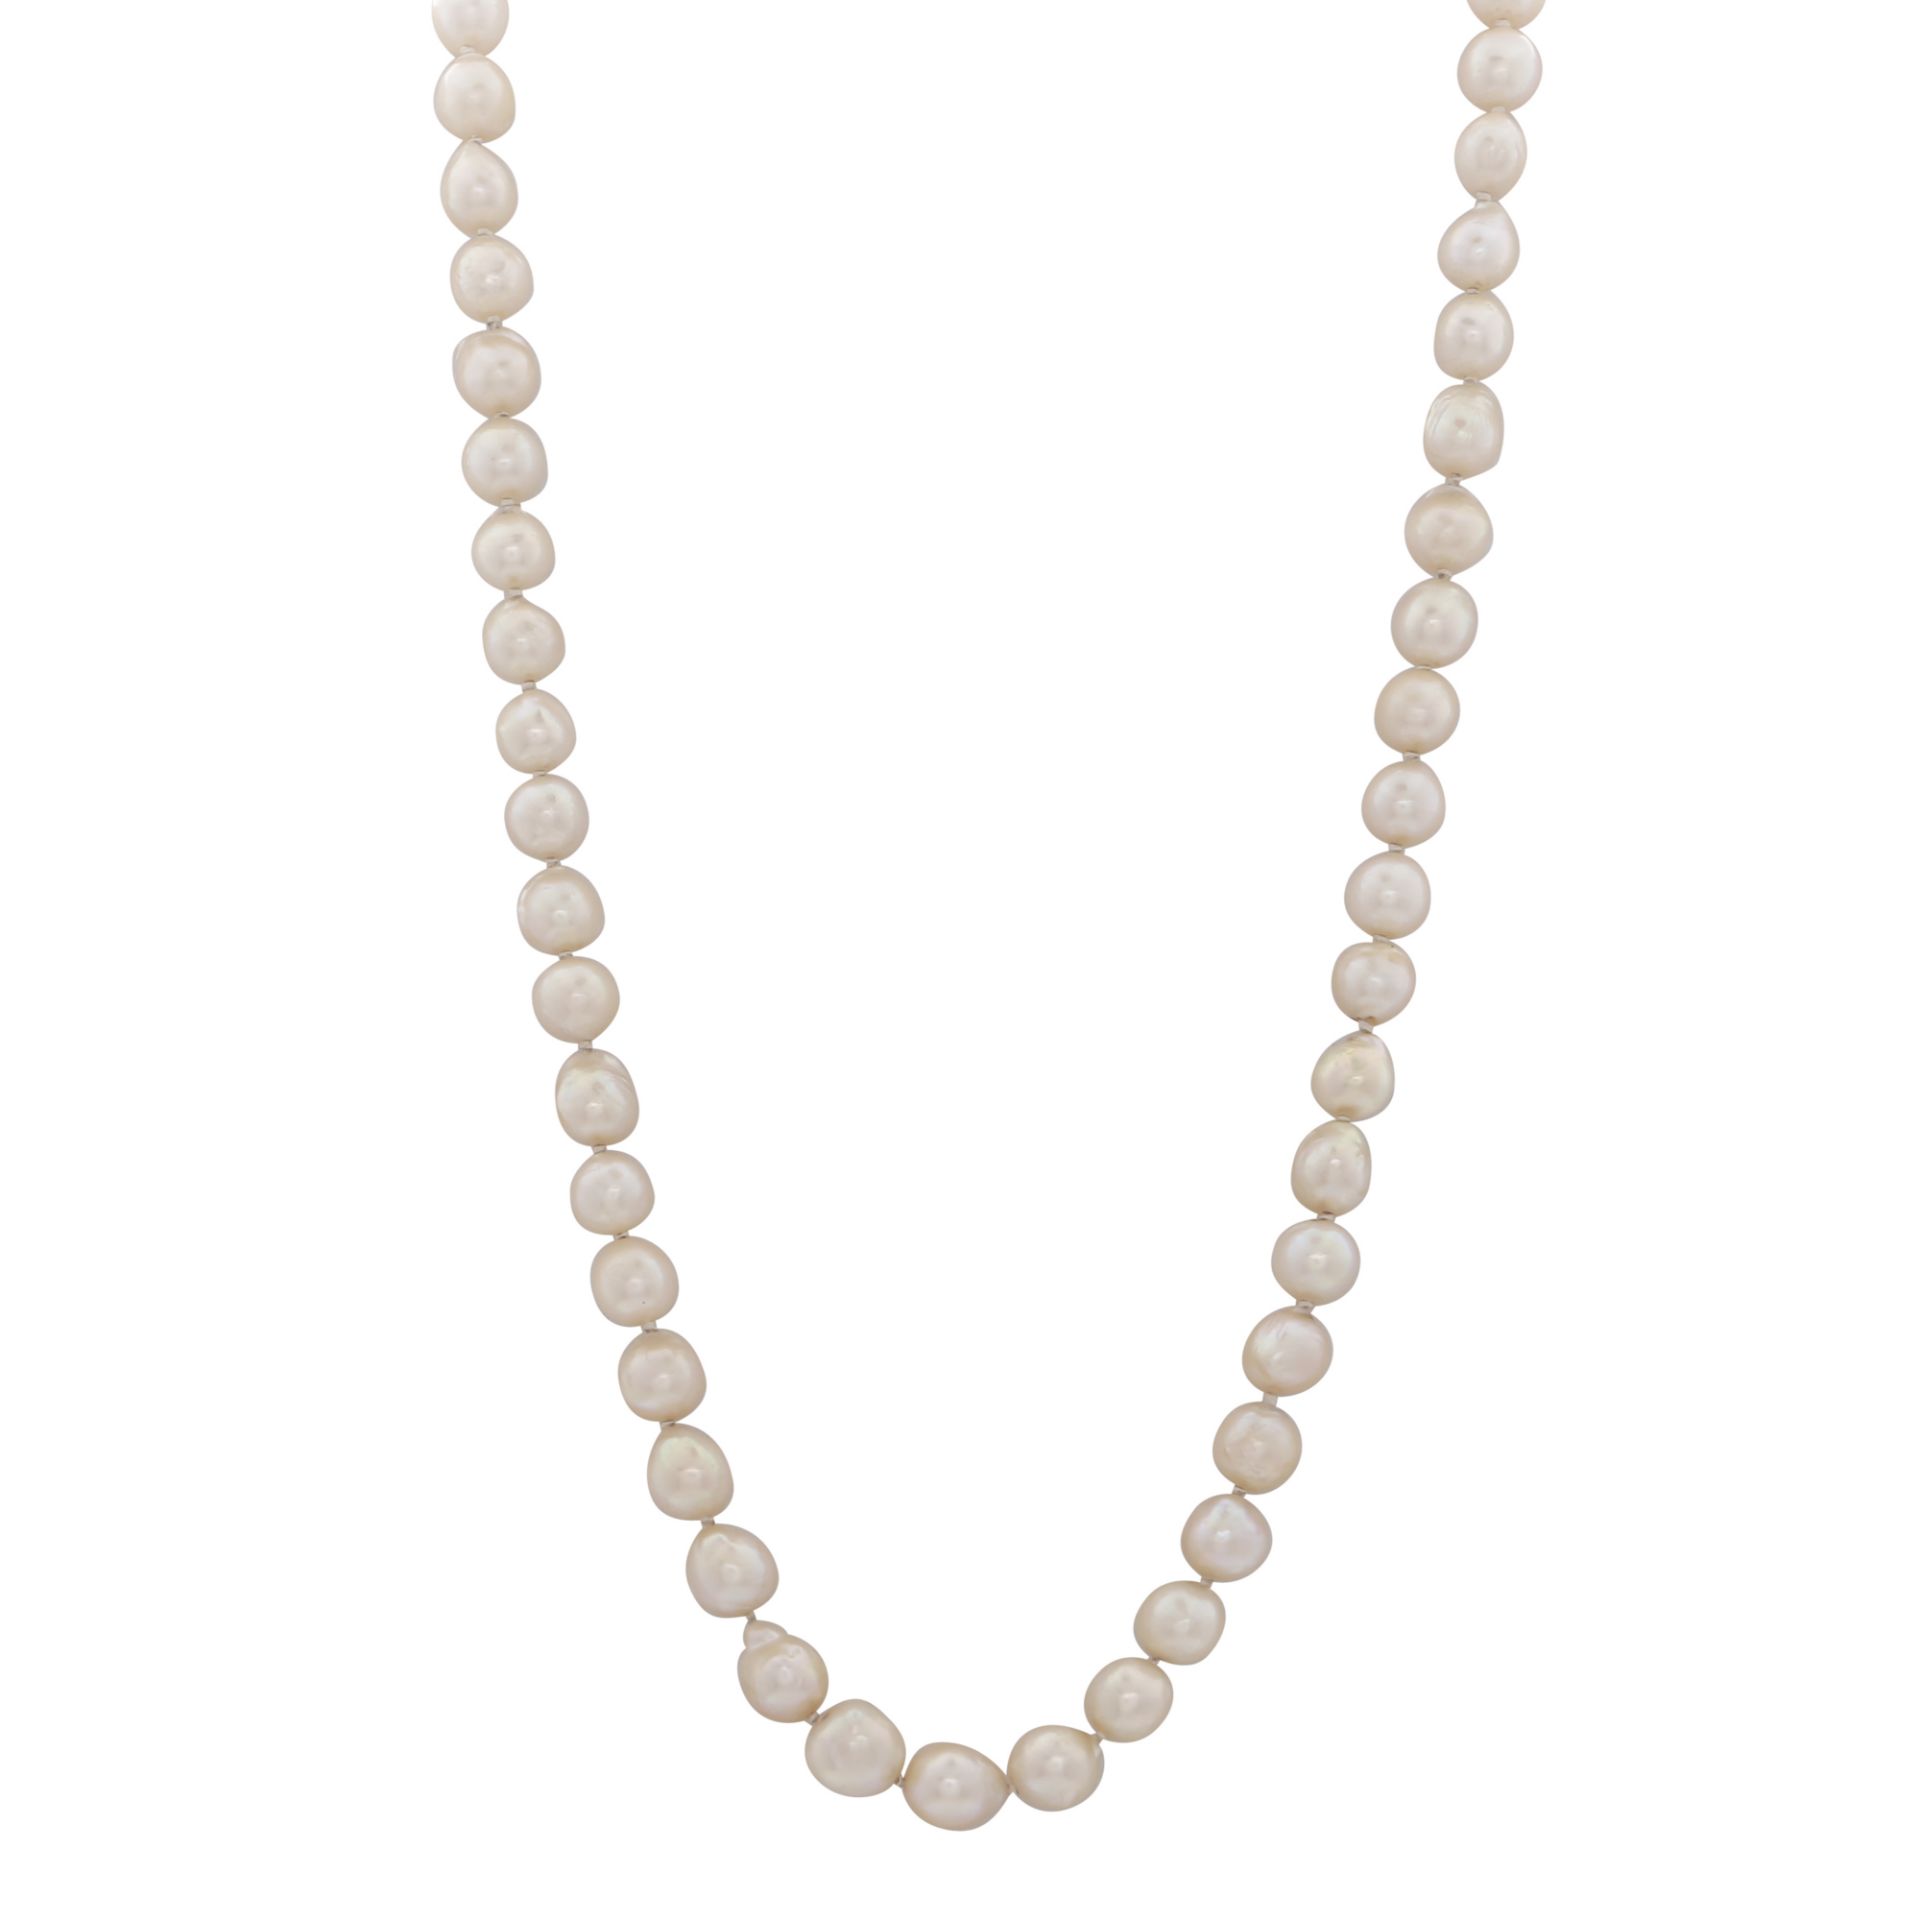 An antique pearl necklace comprising a single strand of pearls. Length 54cm / 21".